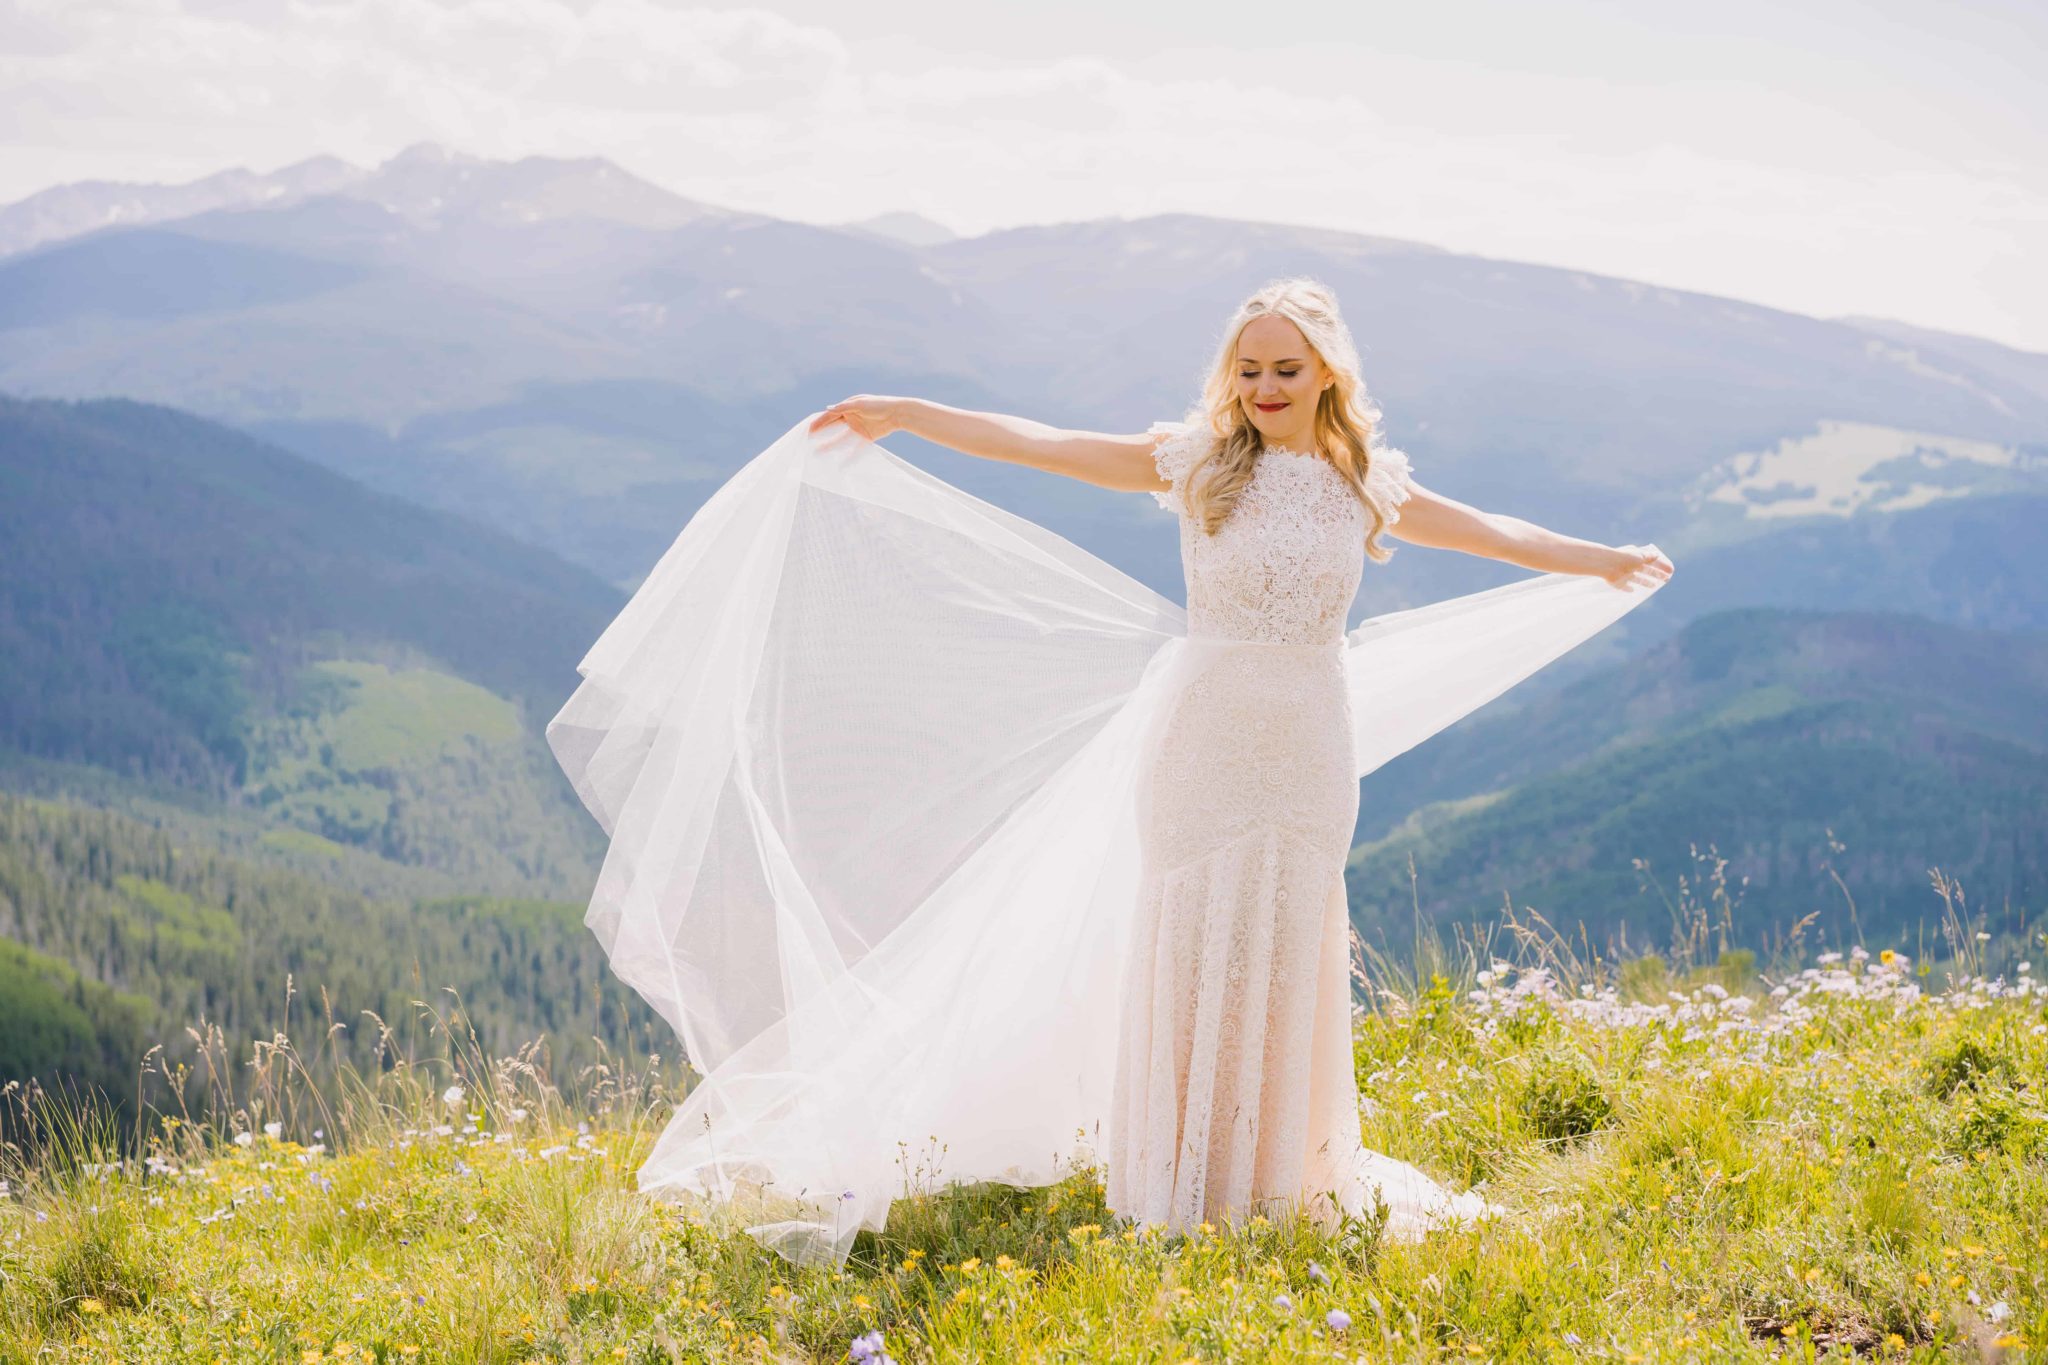 The bride on her wedding day in Colorado